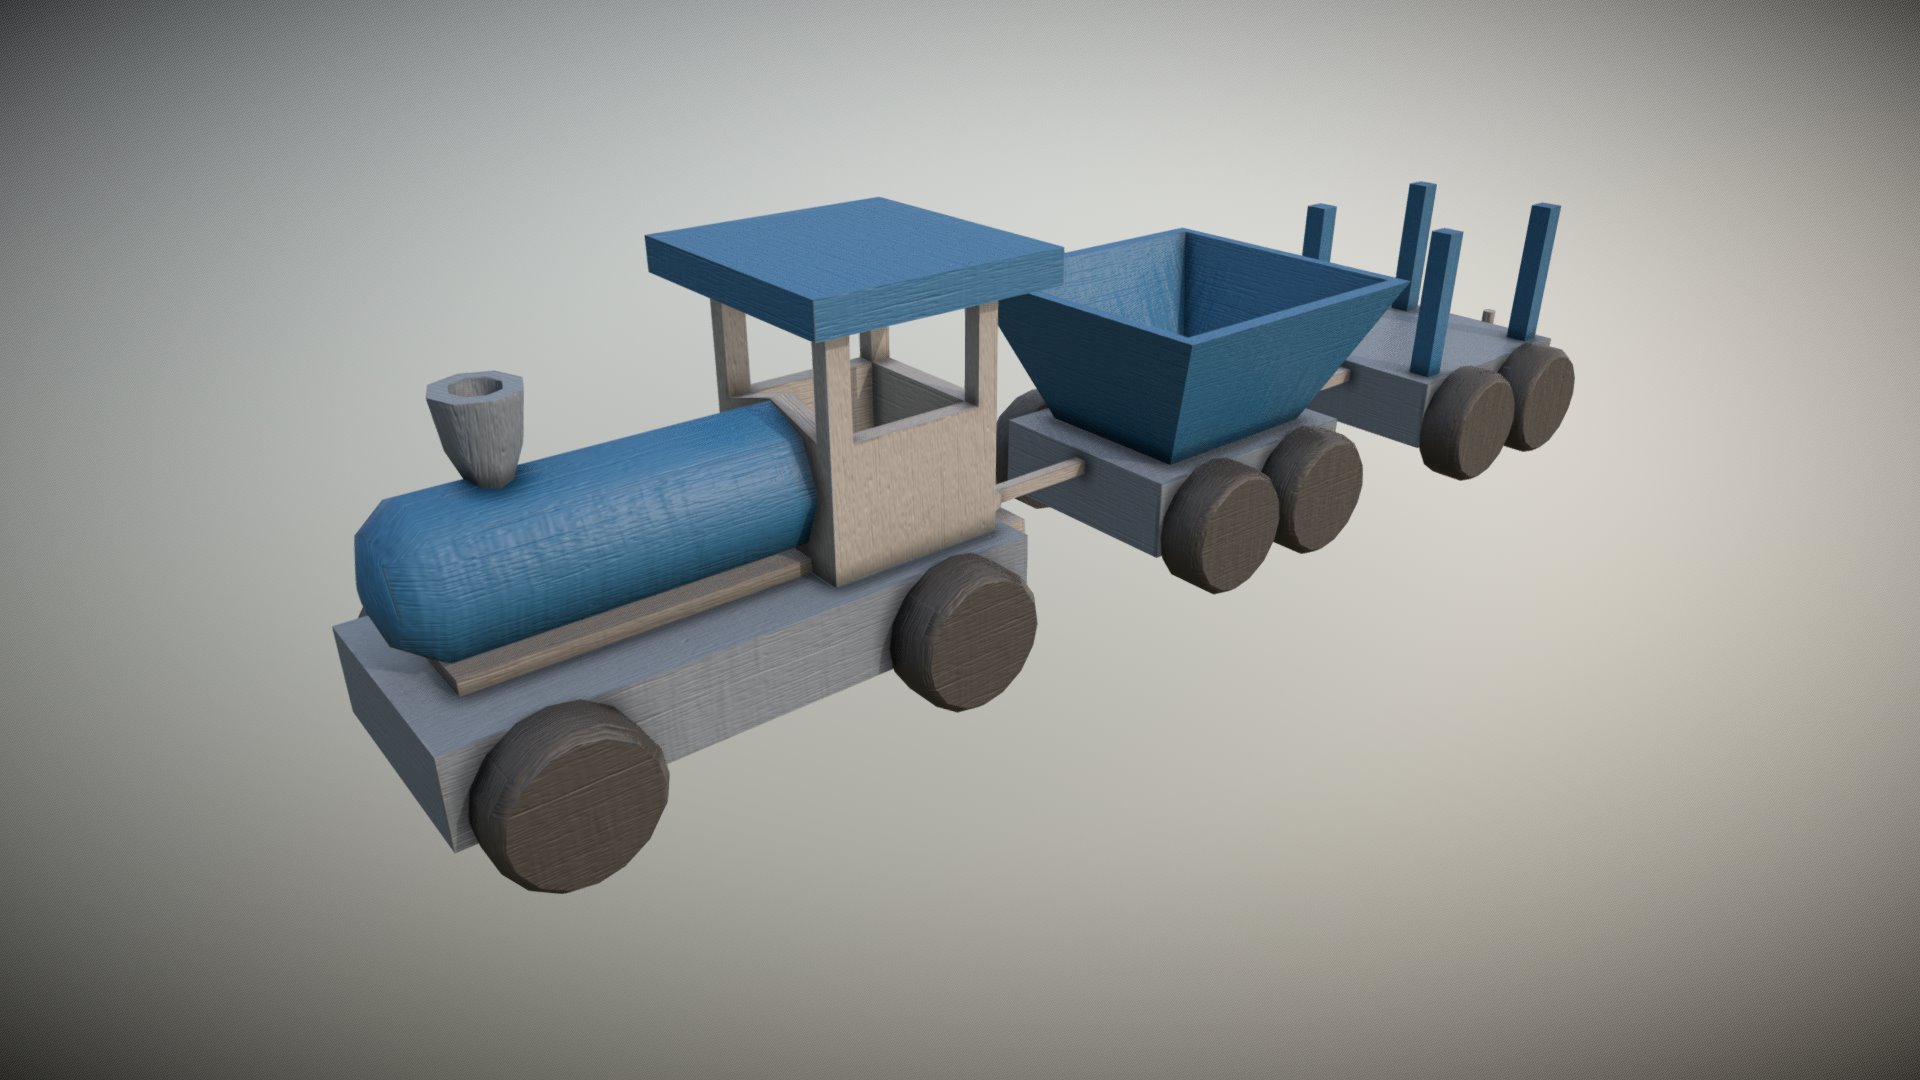 3D model Low Poly Blue Wooden Toy Train - This is a 3D model of the Low Poly Blue Wooden Toy Train. The 3D model is about a few blue and white objects.